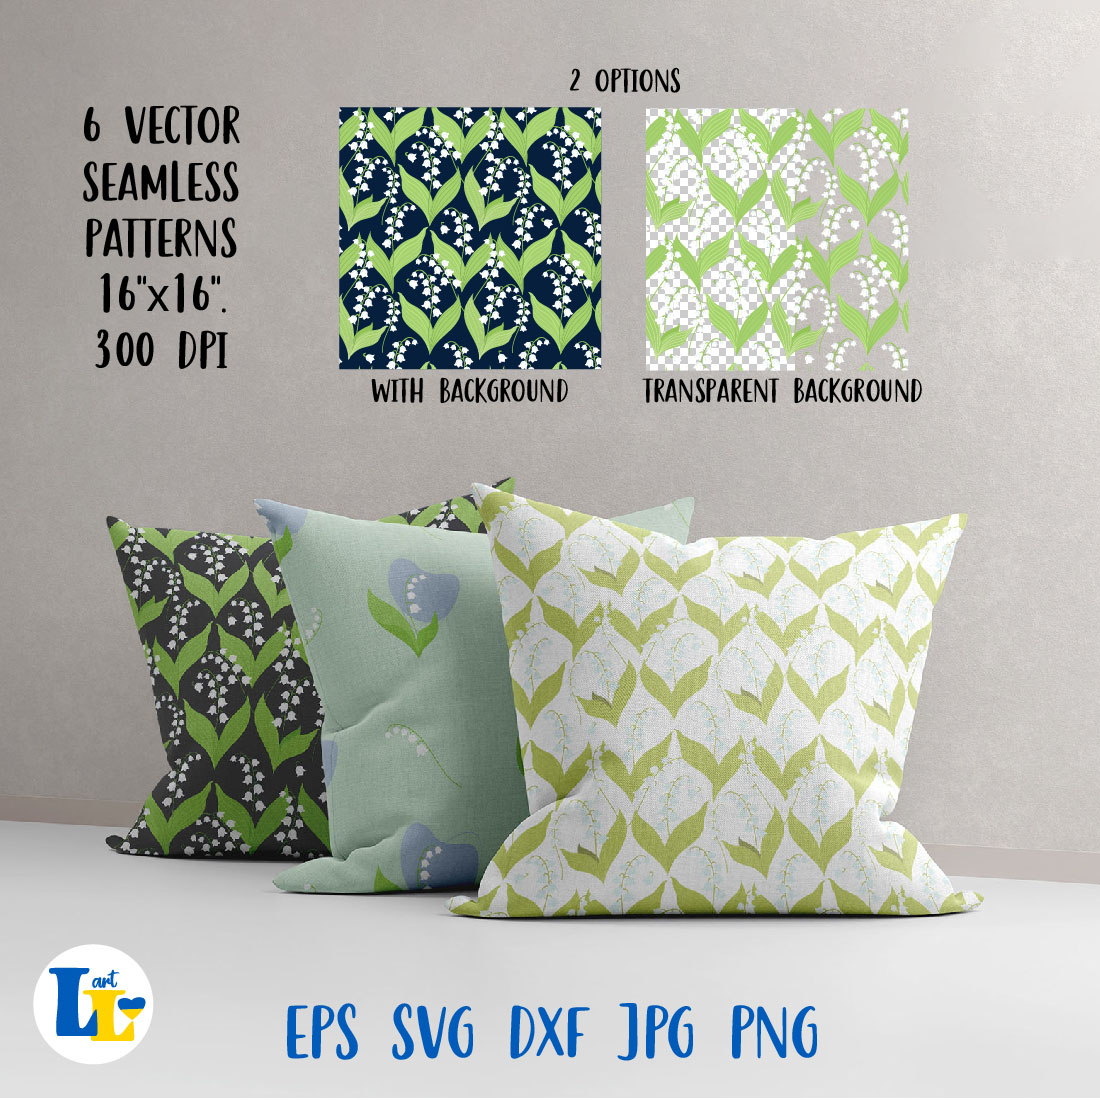 Lily of the Valley Clipart & Patterns cover image.